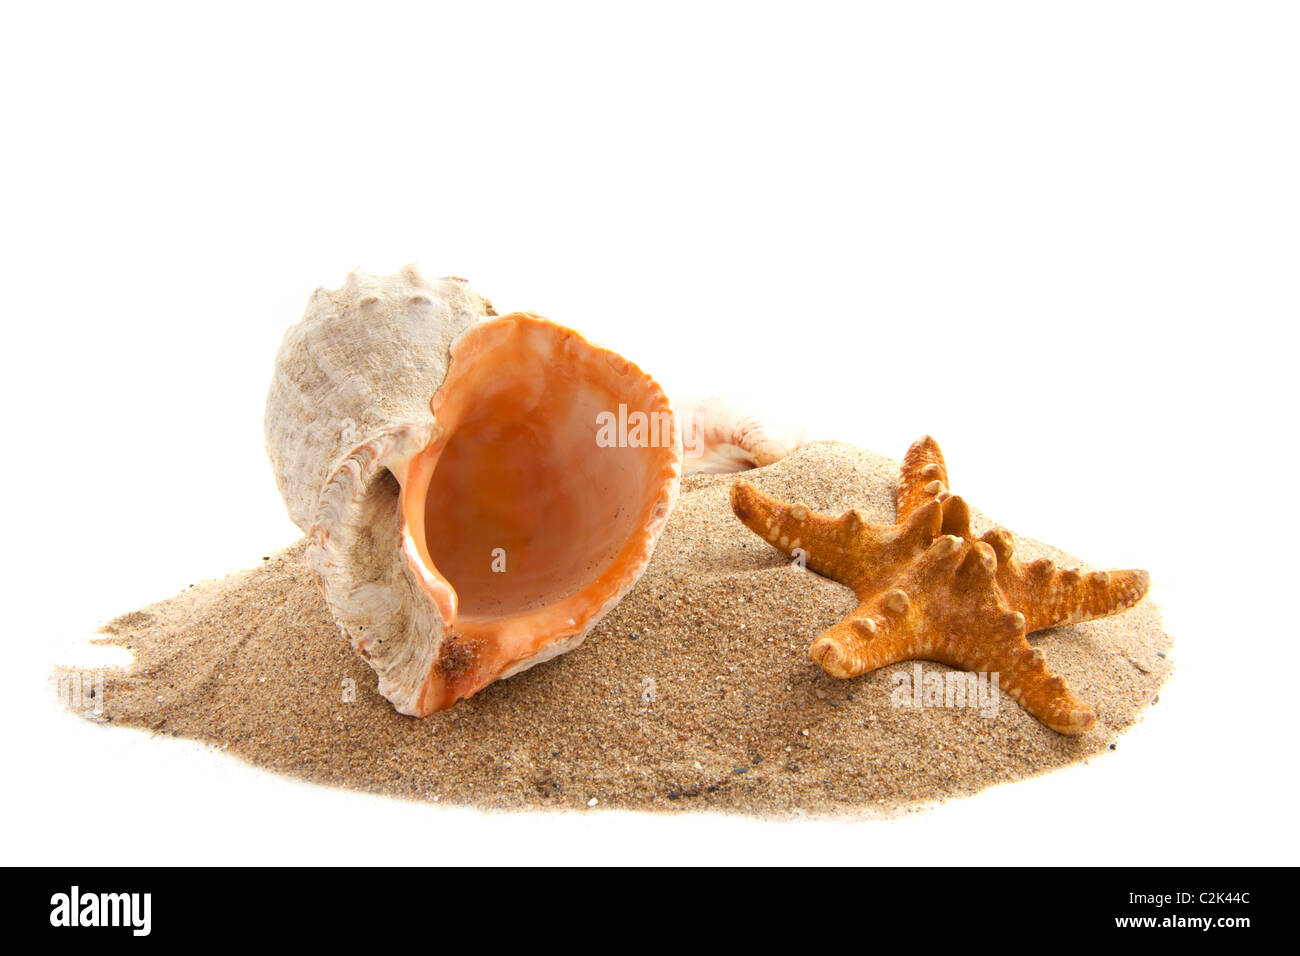 Shells on a pile of sand isolated over white Stock Photo